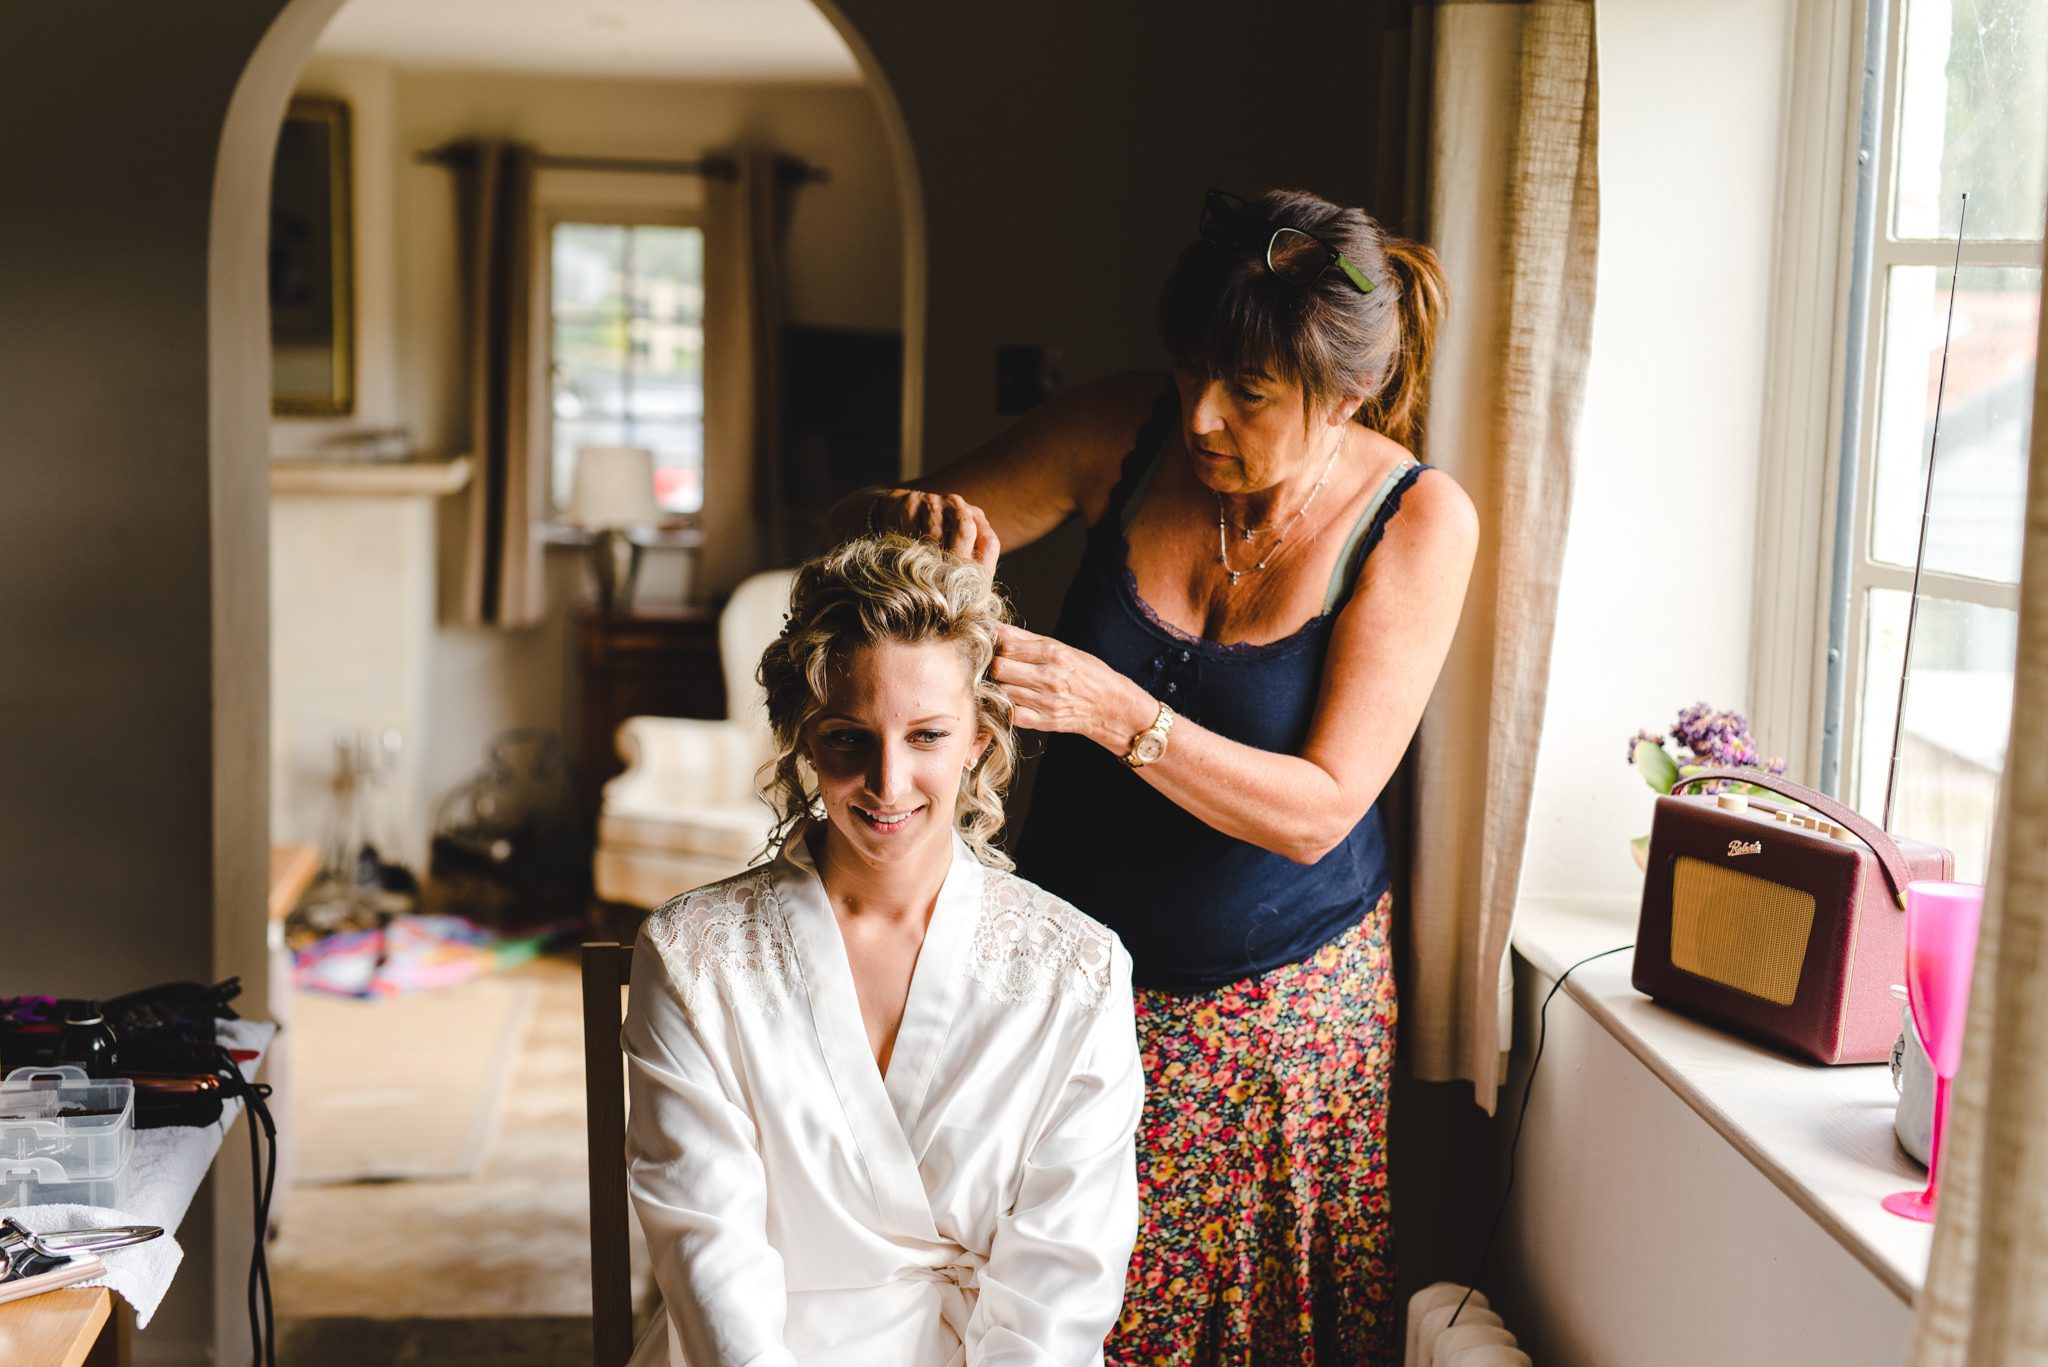 Hair being styled for a wedding